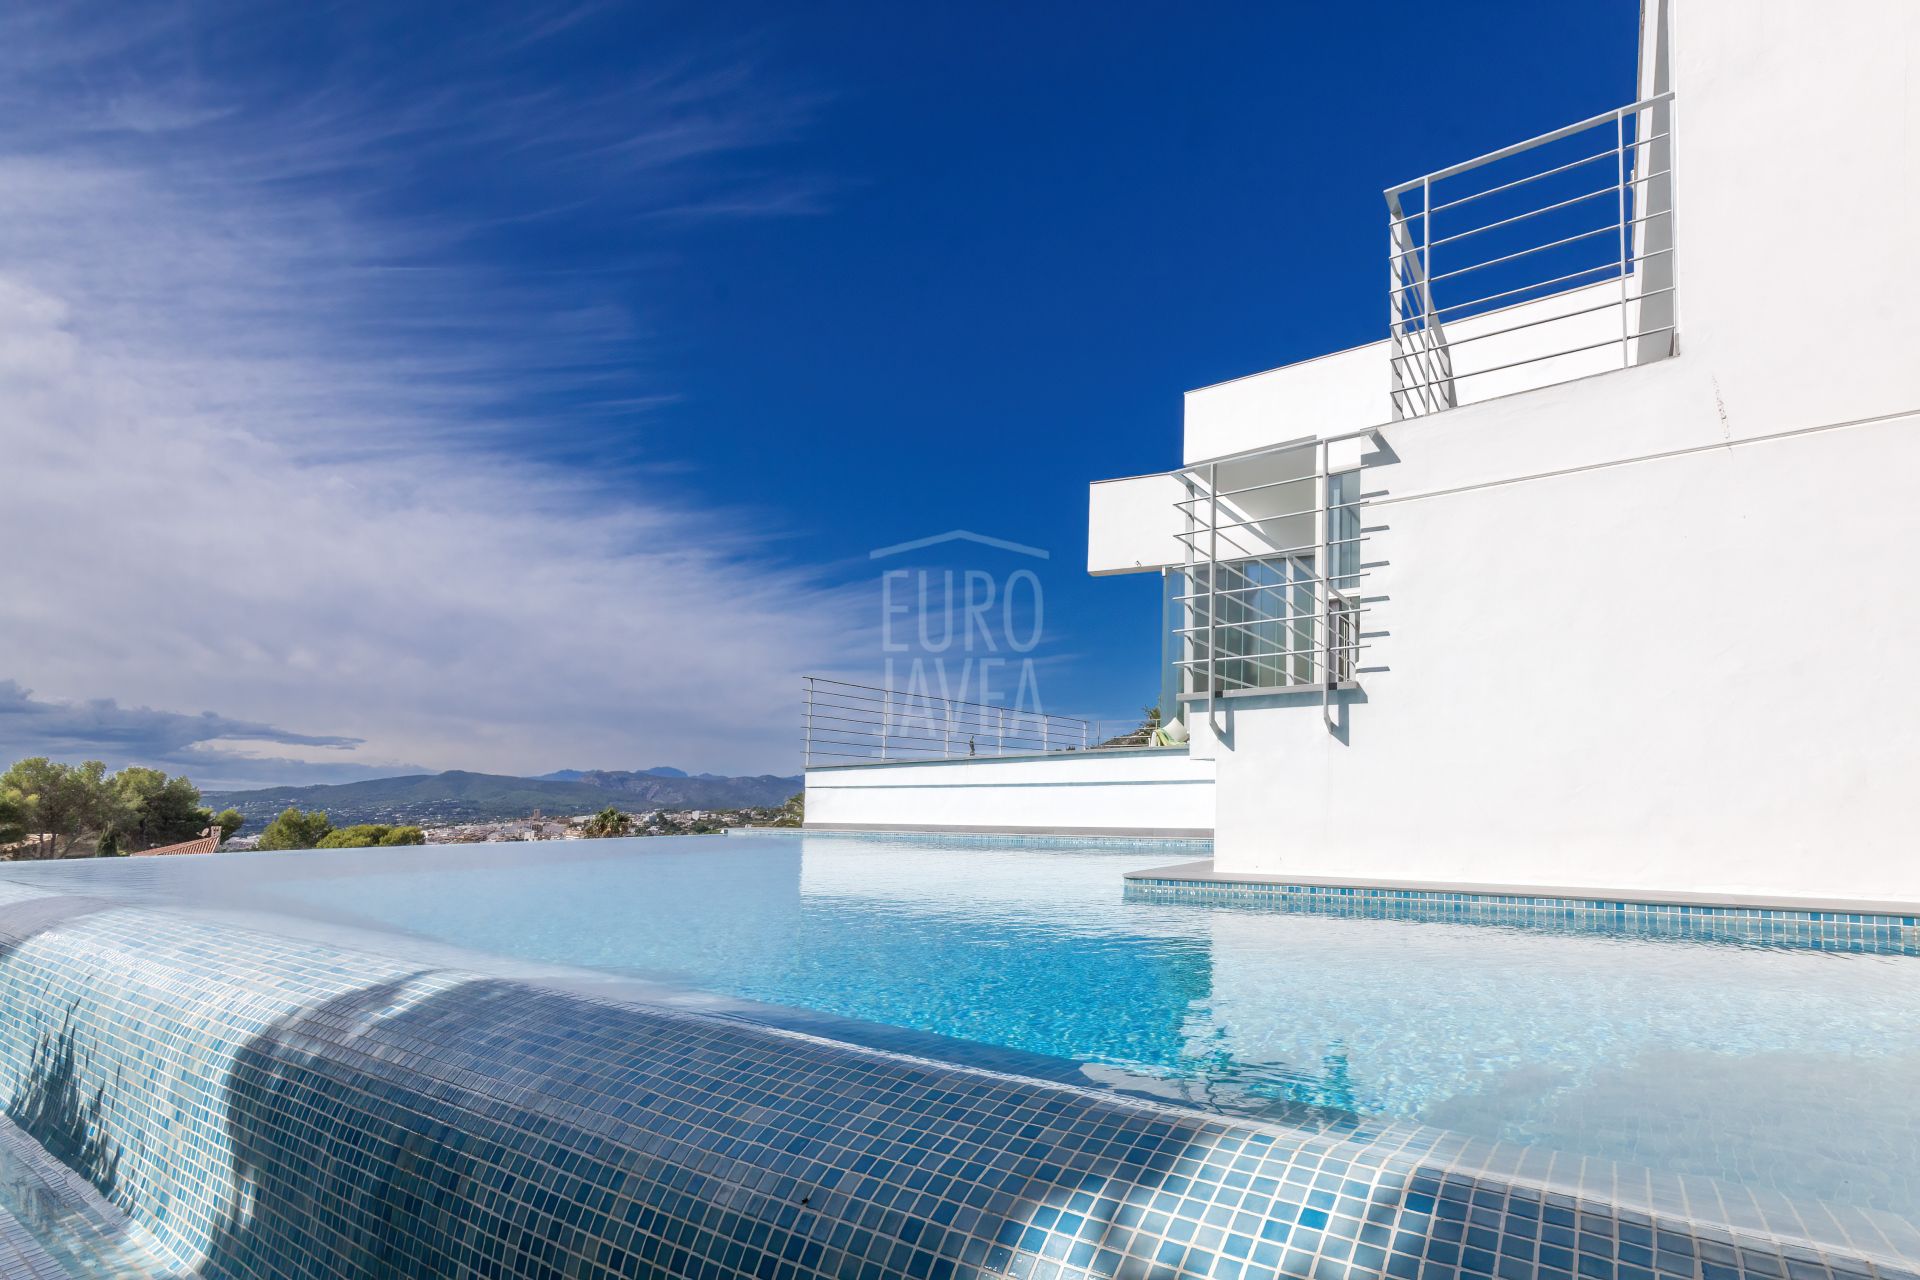 Villa for sale exclusively with Eurojavea in the area of La Corona, with exceptional open views of the sea